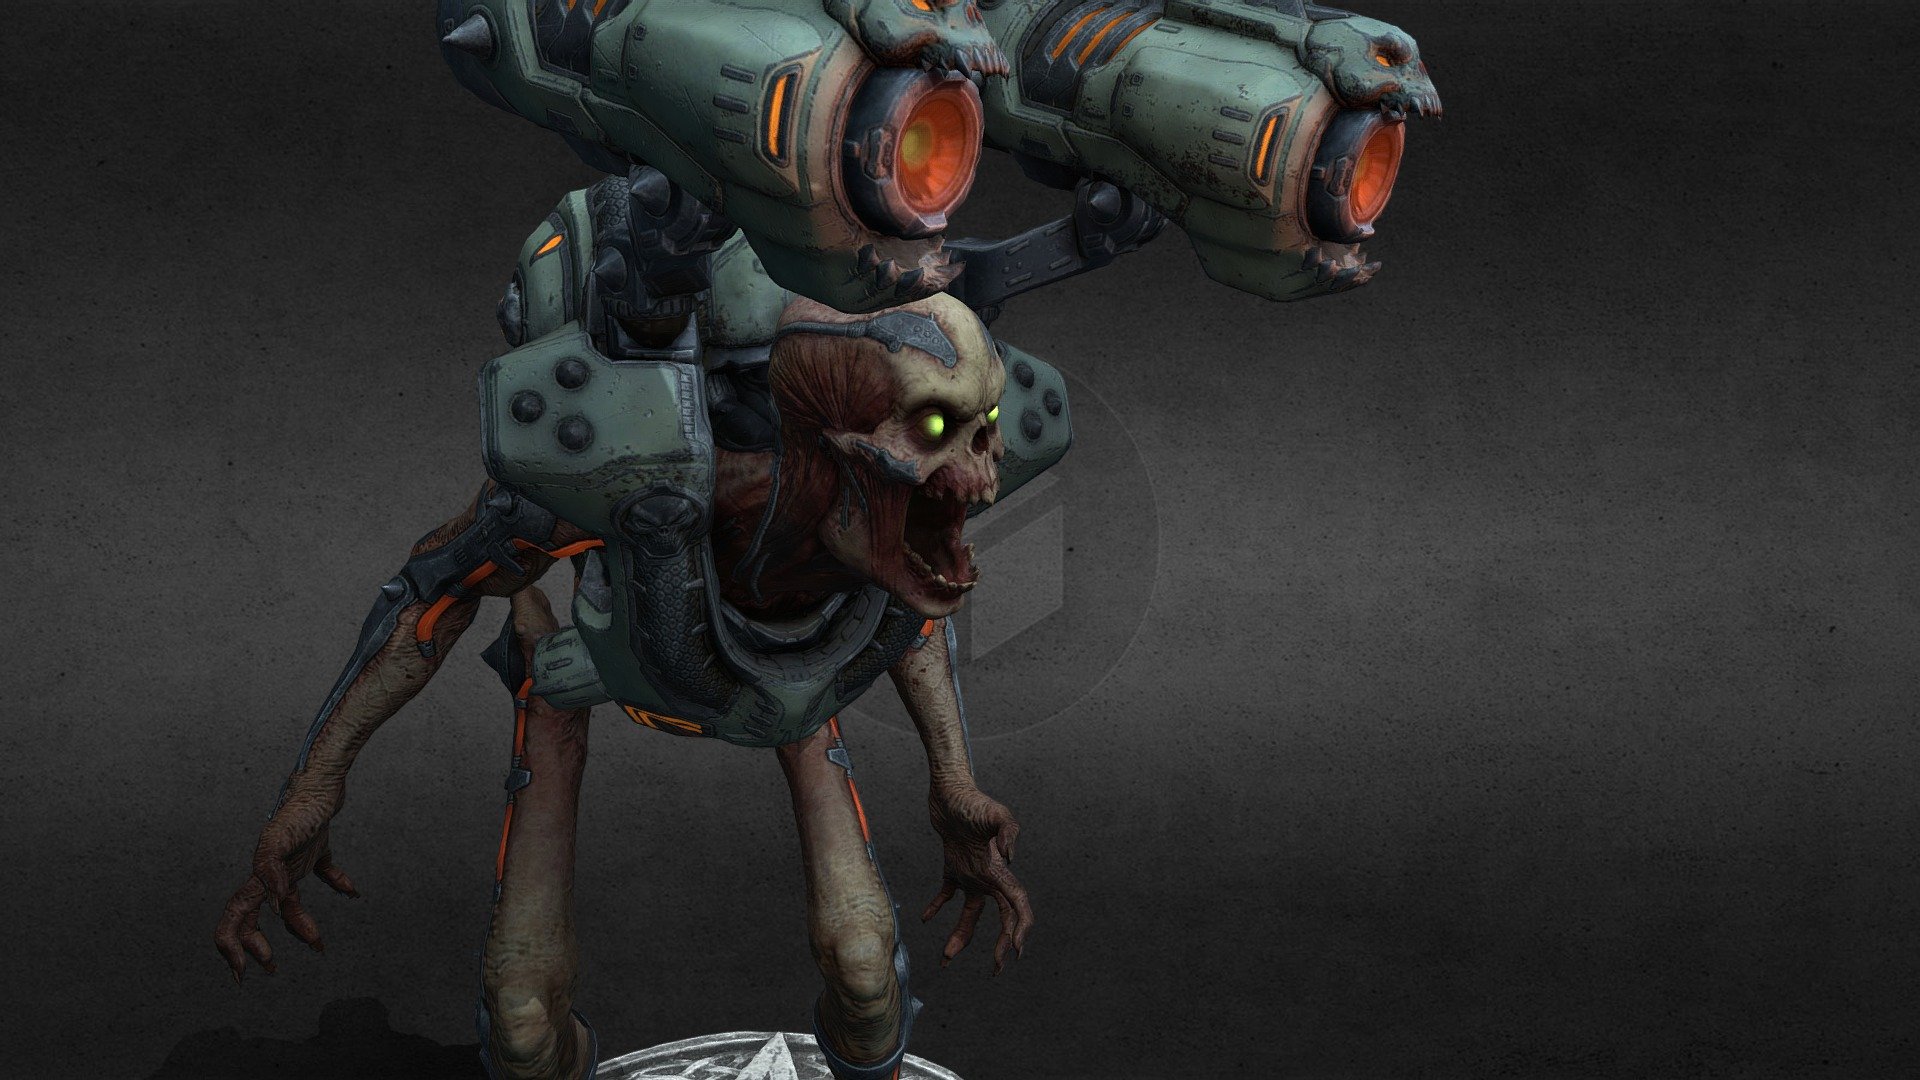 Figurine from the game Doom Eternal (2020).


Separate figure and base





Revenant

Polygons : 287971


Vertex : 144349




Basement //



Polygons : 62564

Vertex : 31284



Codex :
The Revenant program, a bio-weapon experiment utilizing re-animated necrotic human tissue, was believed to have been destroyed with the collapse of the UAC facility on Mars. However, the emergence of the Cultist enclaves on Earth - former UAC deviations now under Hell's direct control - have begun work on a second wave of production of the Revenant program. While much of the platform's existing weapon payload is preserved as originally designed, the cyber-neural programming has undergone modification. Patterned signals are wired to the host's frontal cortex, which in turn stimulate a state of frenzied, unrestrained bloodlust. While these signals are active, the host is incapable of thinking or feeling anything but a singular compulsion to inflict death and violence on the living.
 - Revenant from Doom - Buy Royalty Free 3D model by Les illusions digitales (@lesillusionsdigitales) 3d model